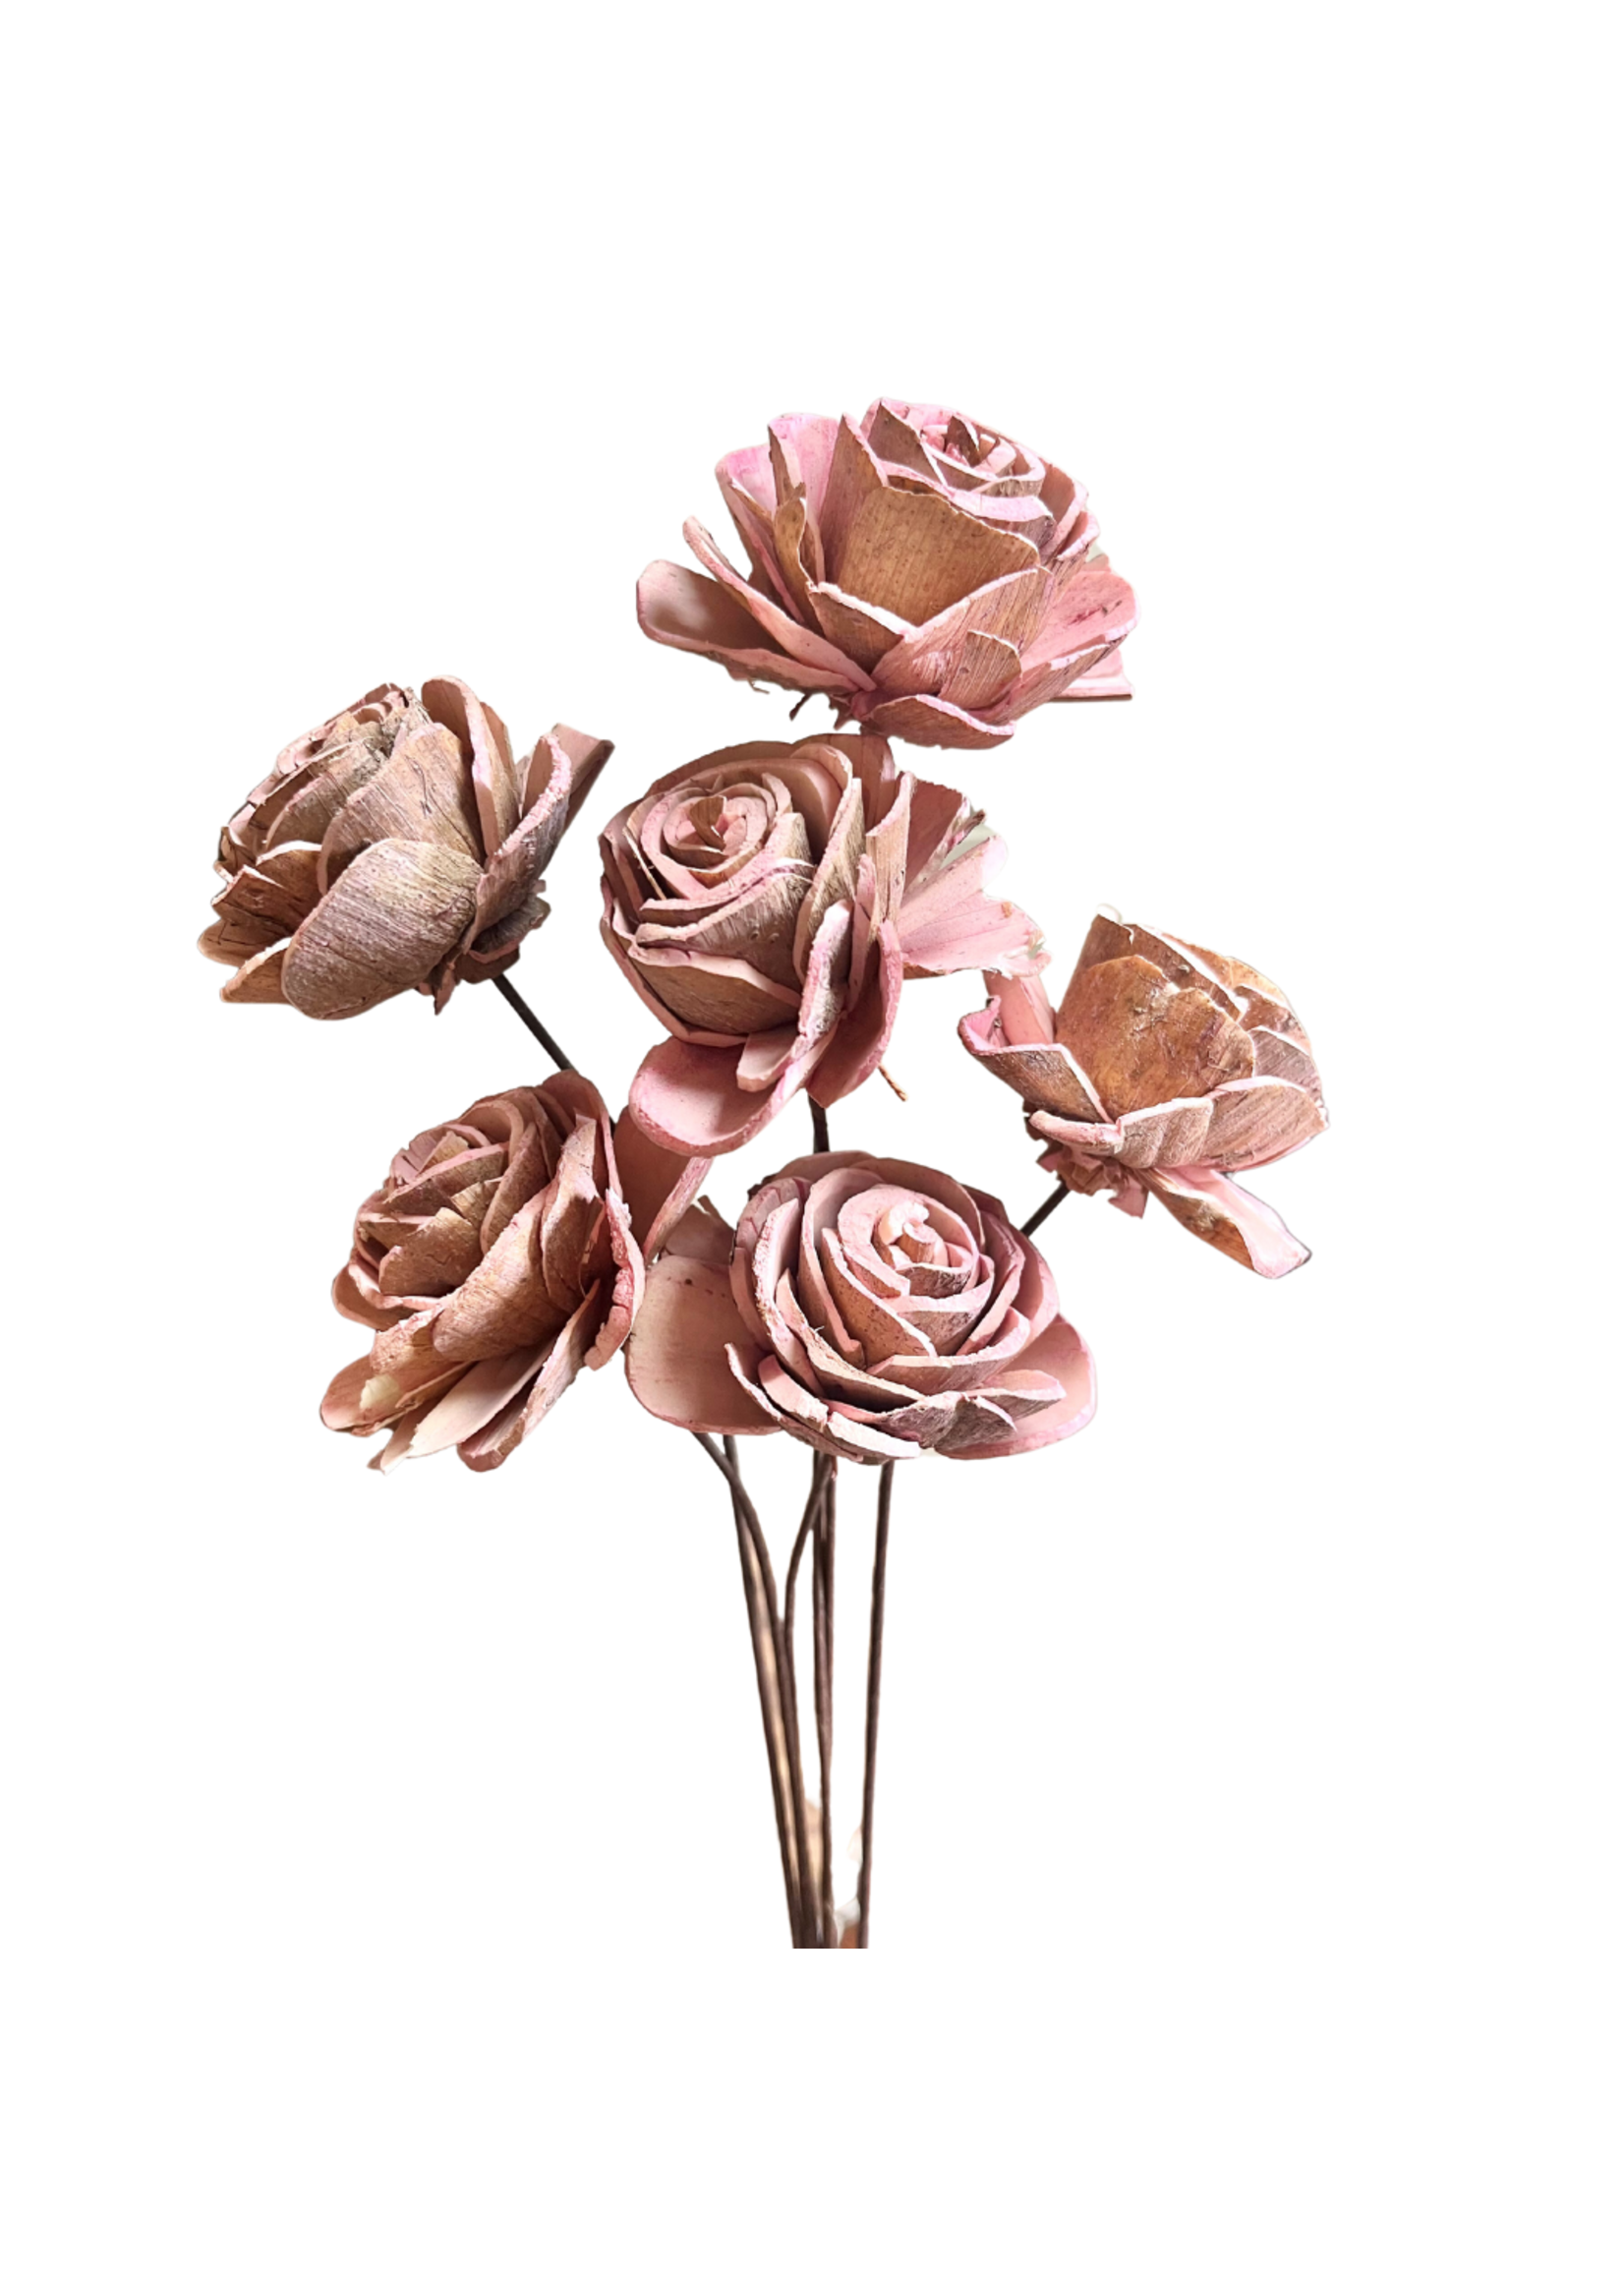 SOLA ROSE SMALL LIGHT PINK 2.5" DIA 6 STEMS